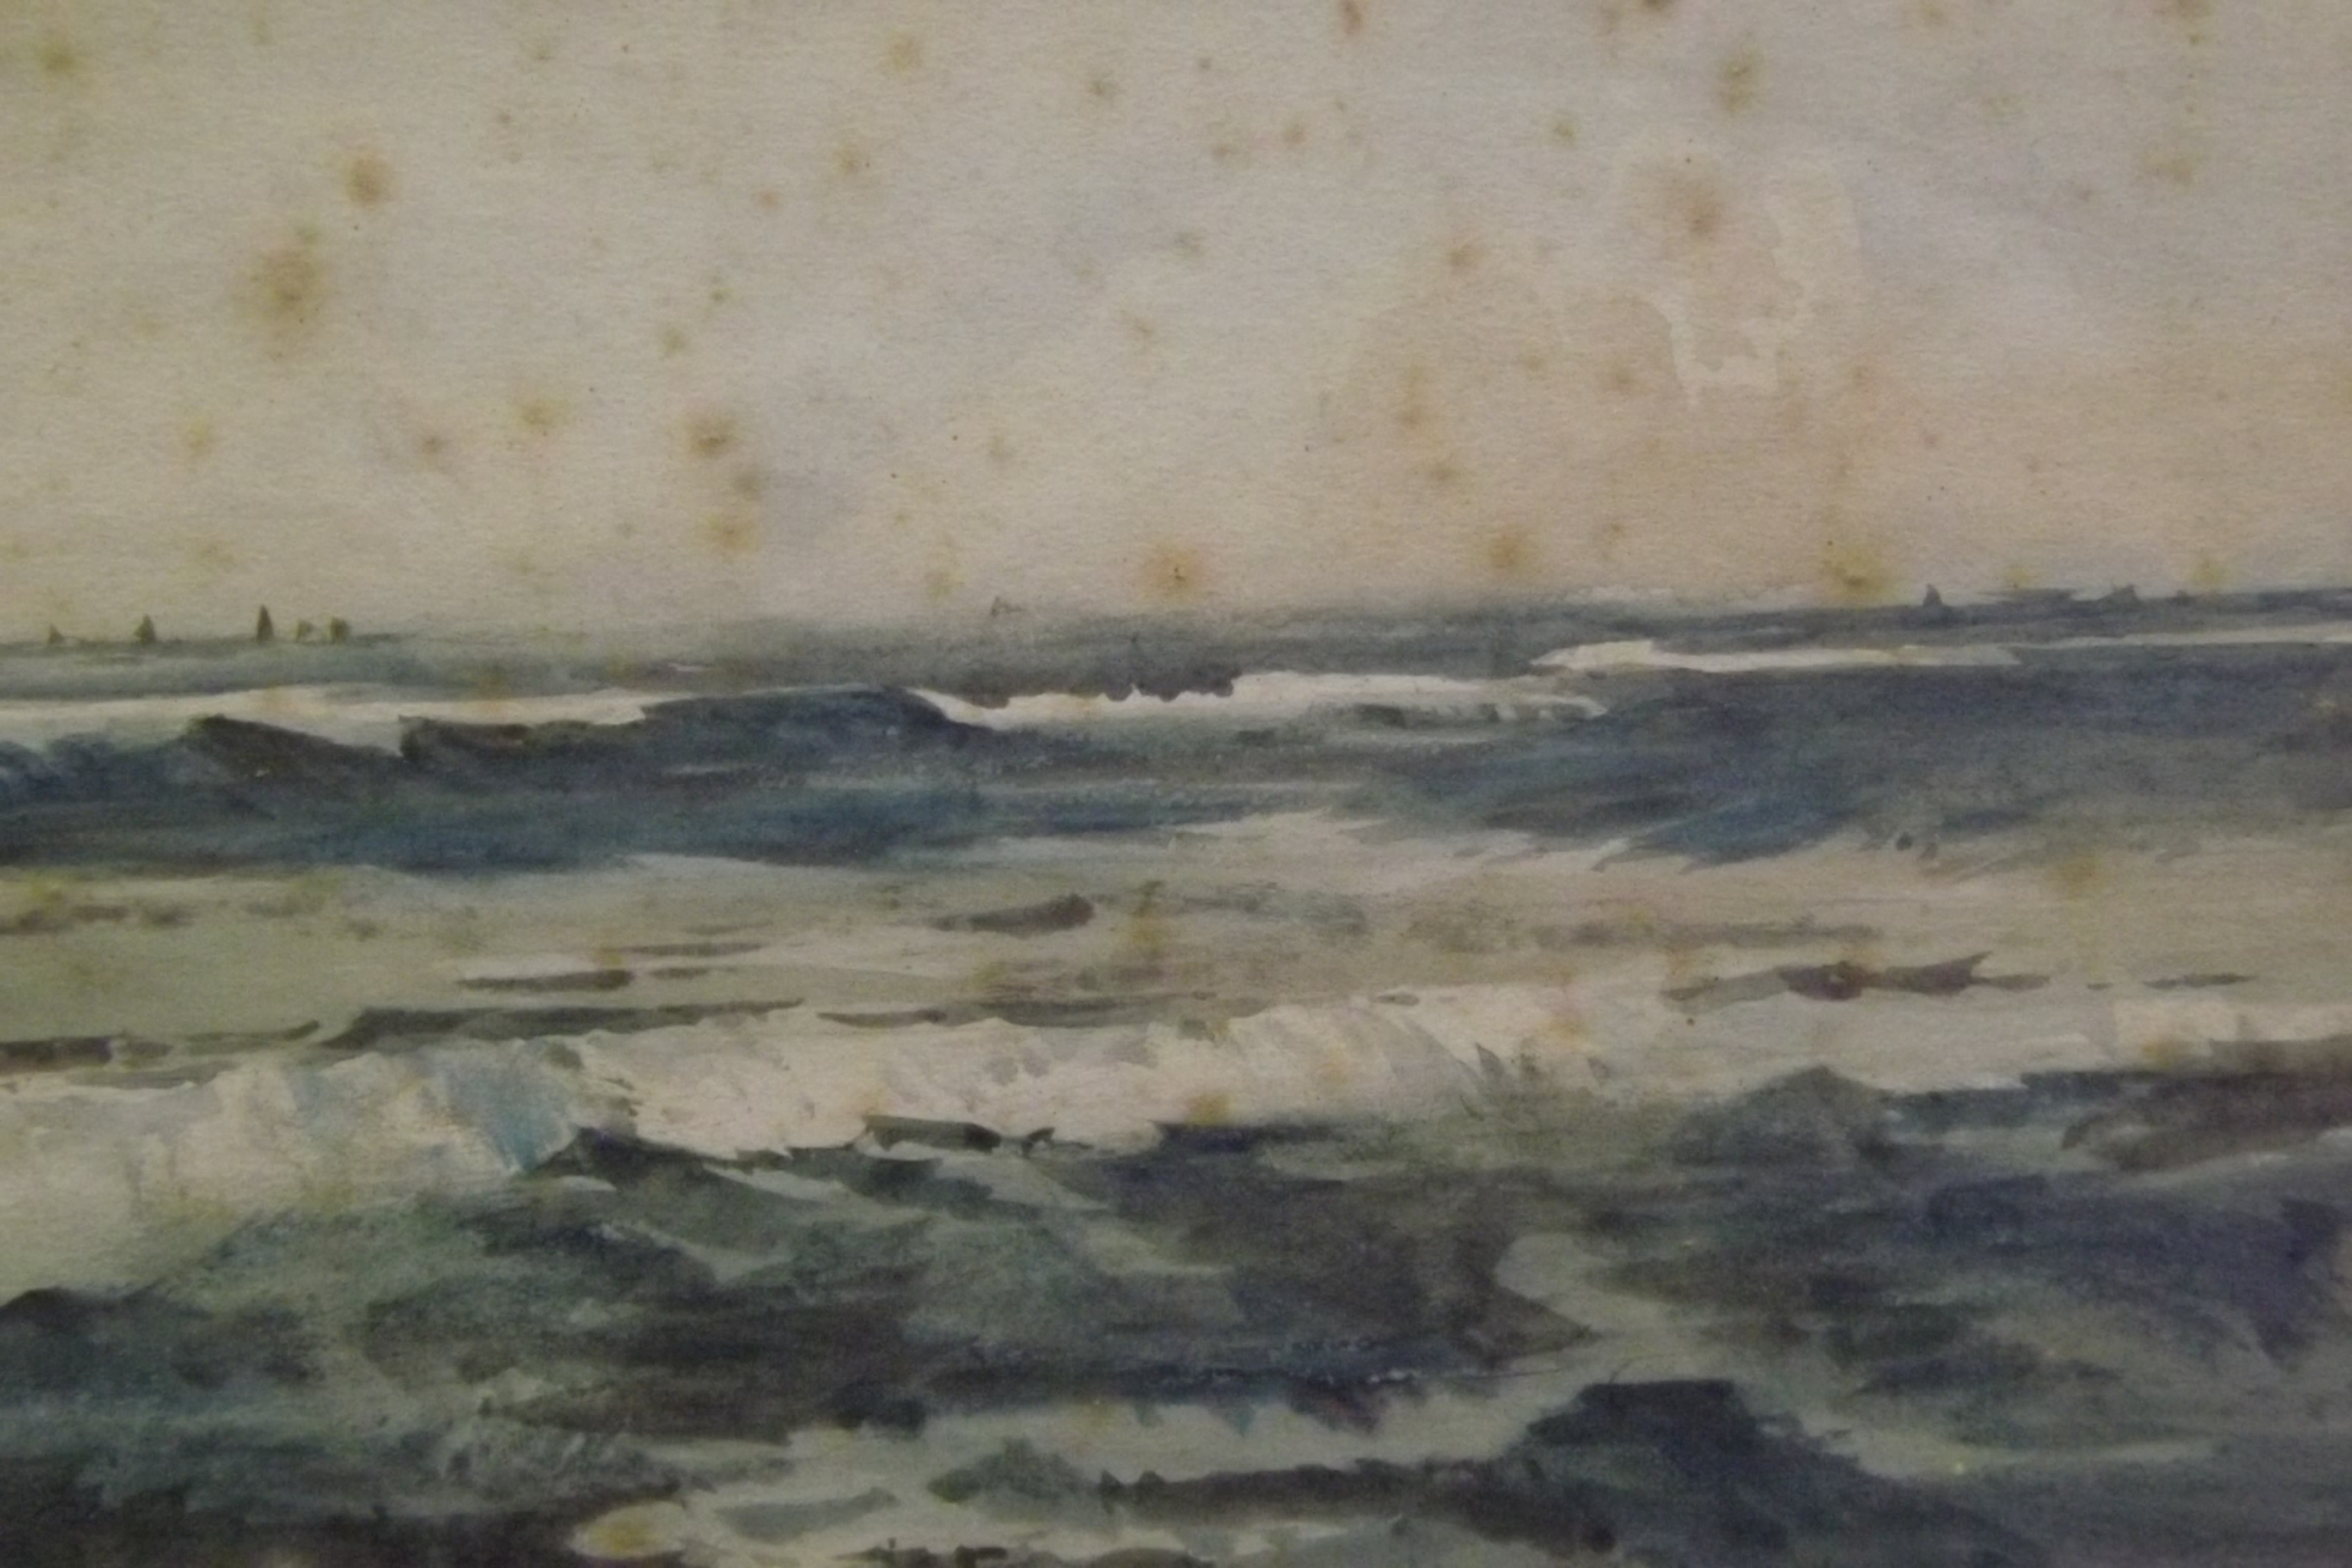 JOHN GUTTERIDGE SYKES
Distant shipping
Watercolour
Inscribed label to the back
12 x 17.5cm